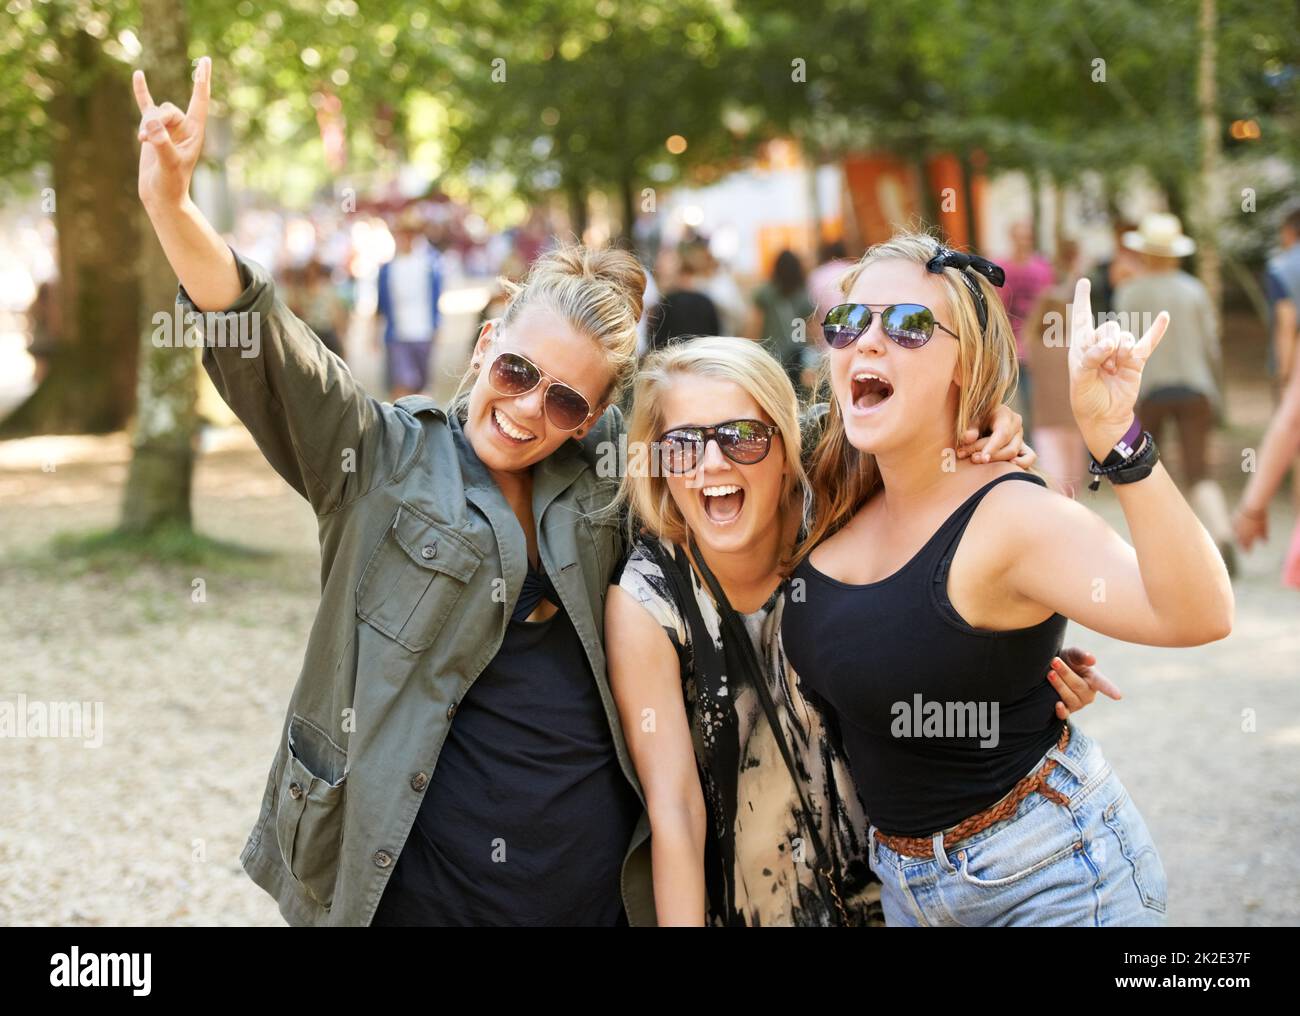 Giving it horns. Three girlfriends partying at an outdoors music festival. Stock Photo